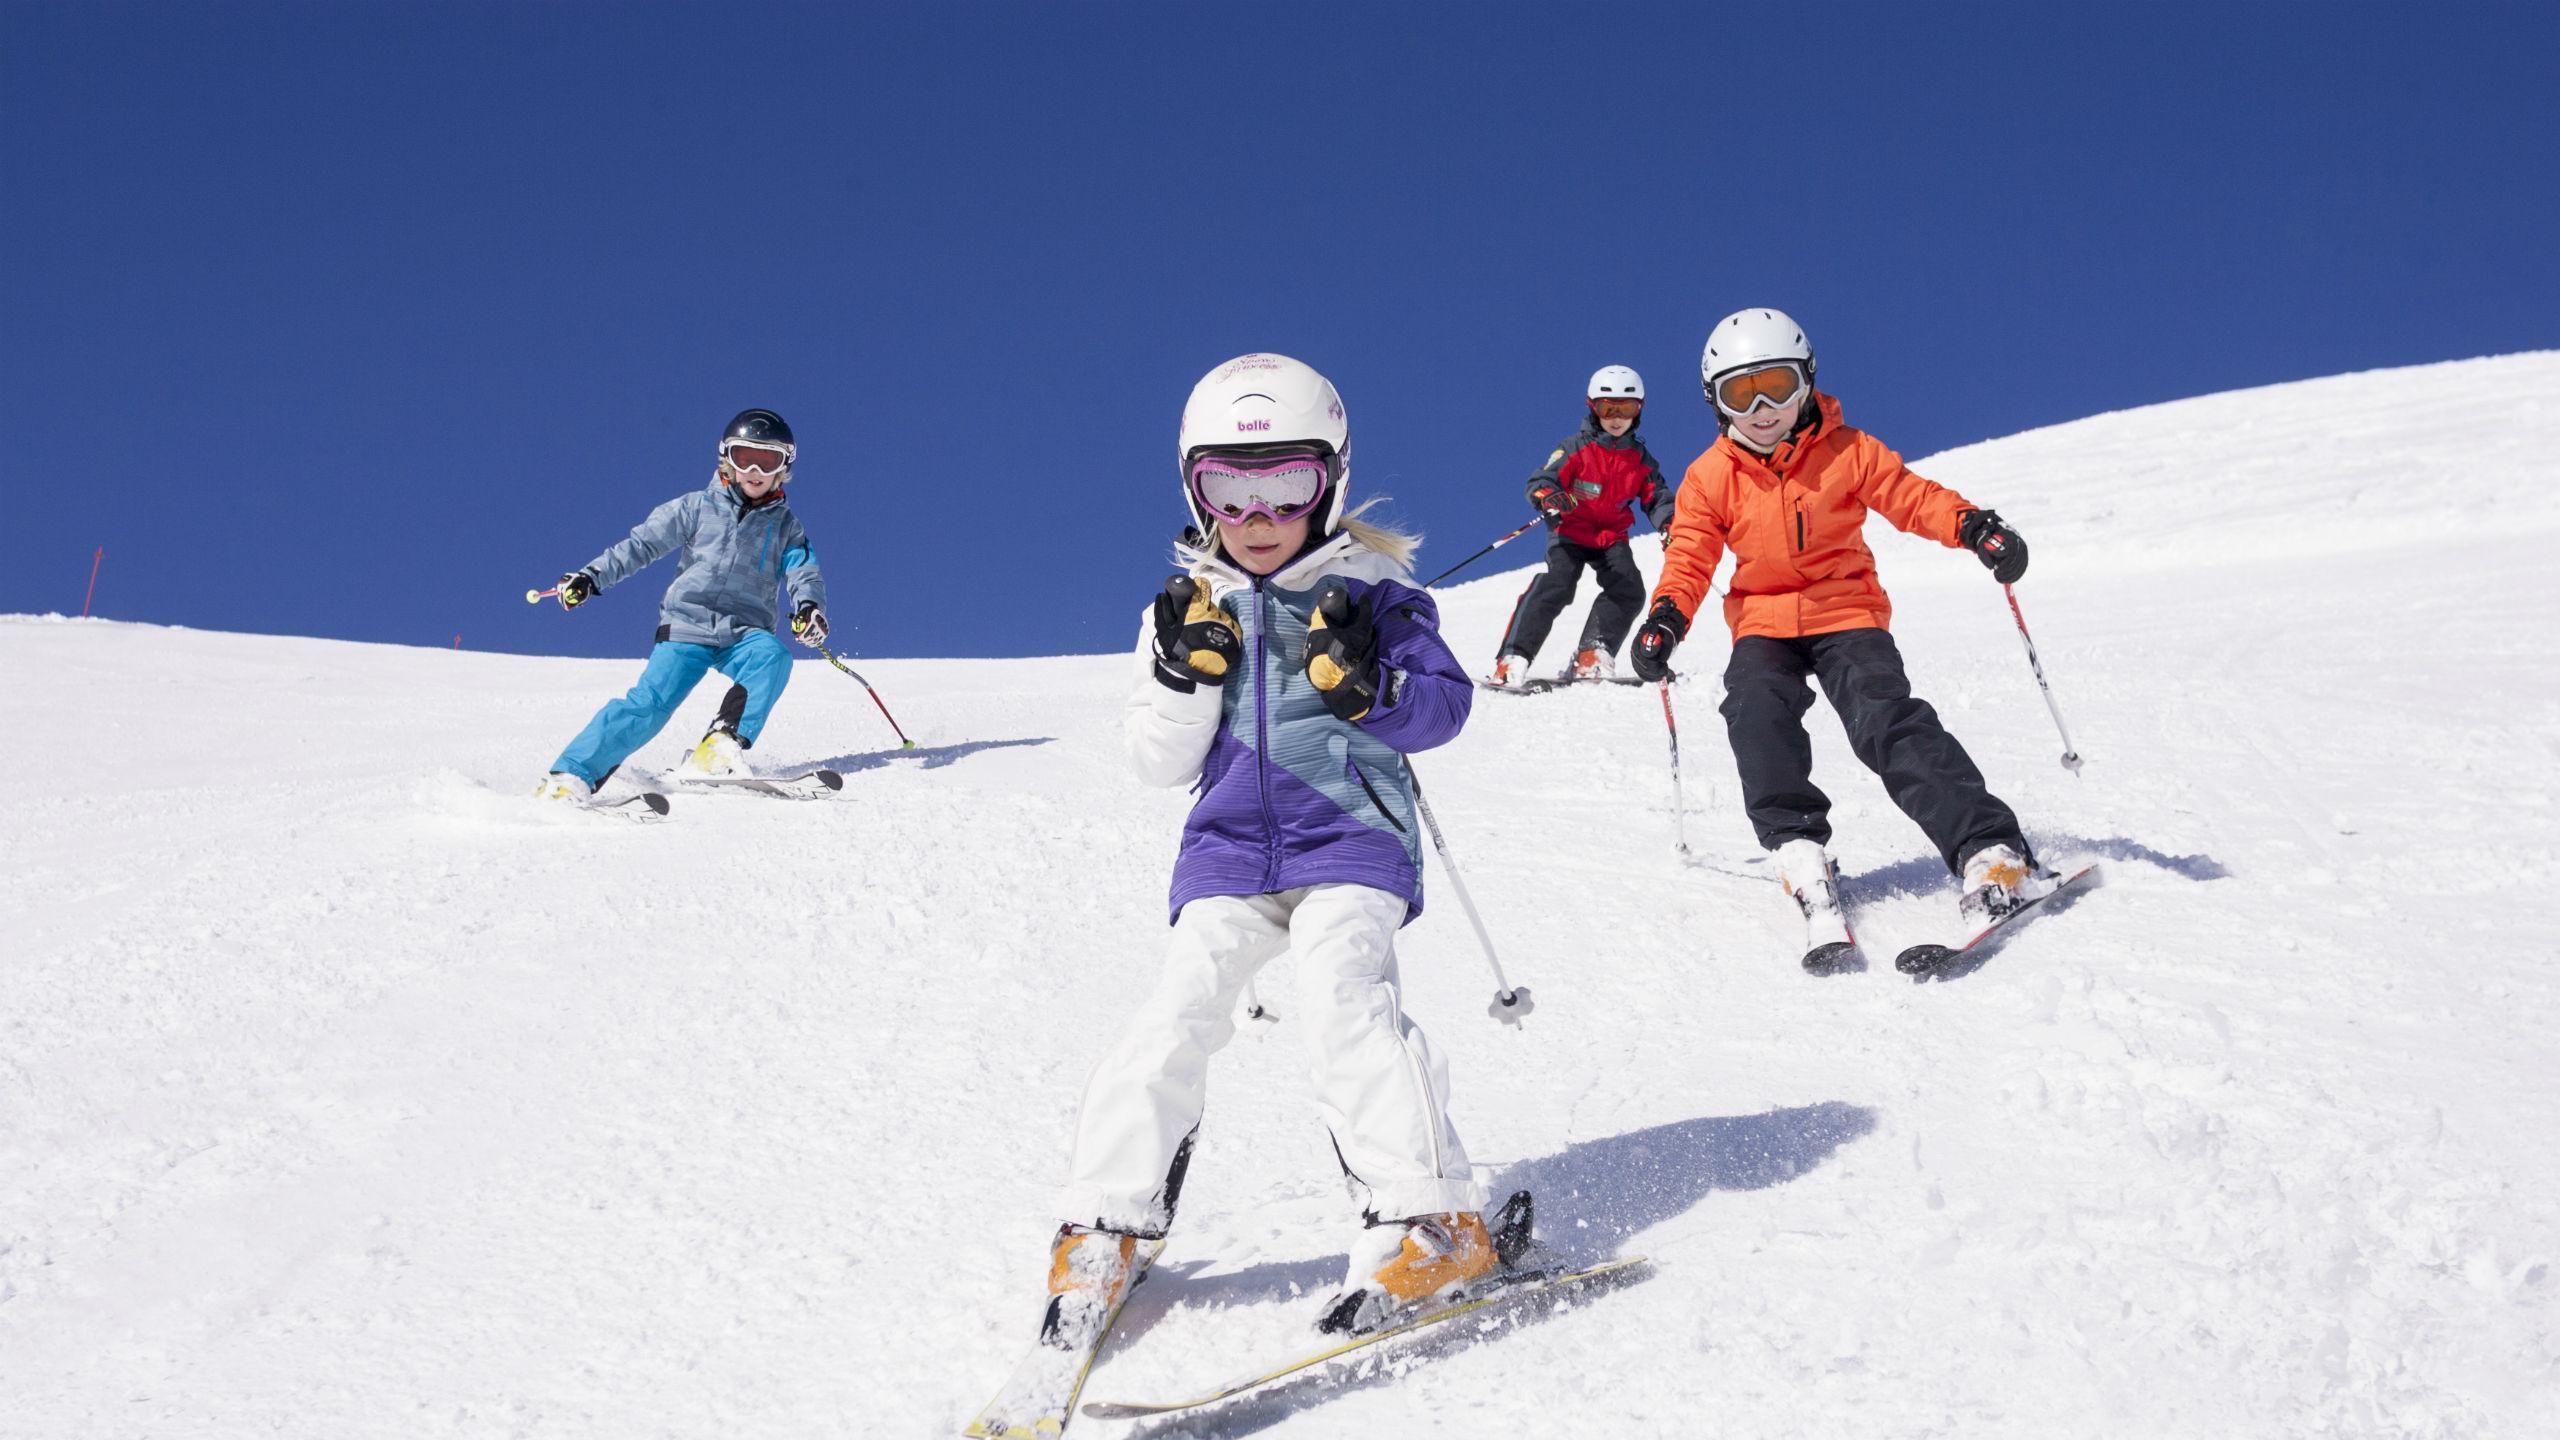 When to get the kids skiing